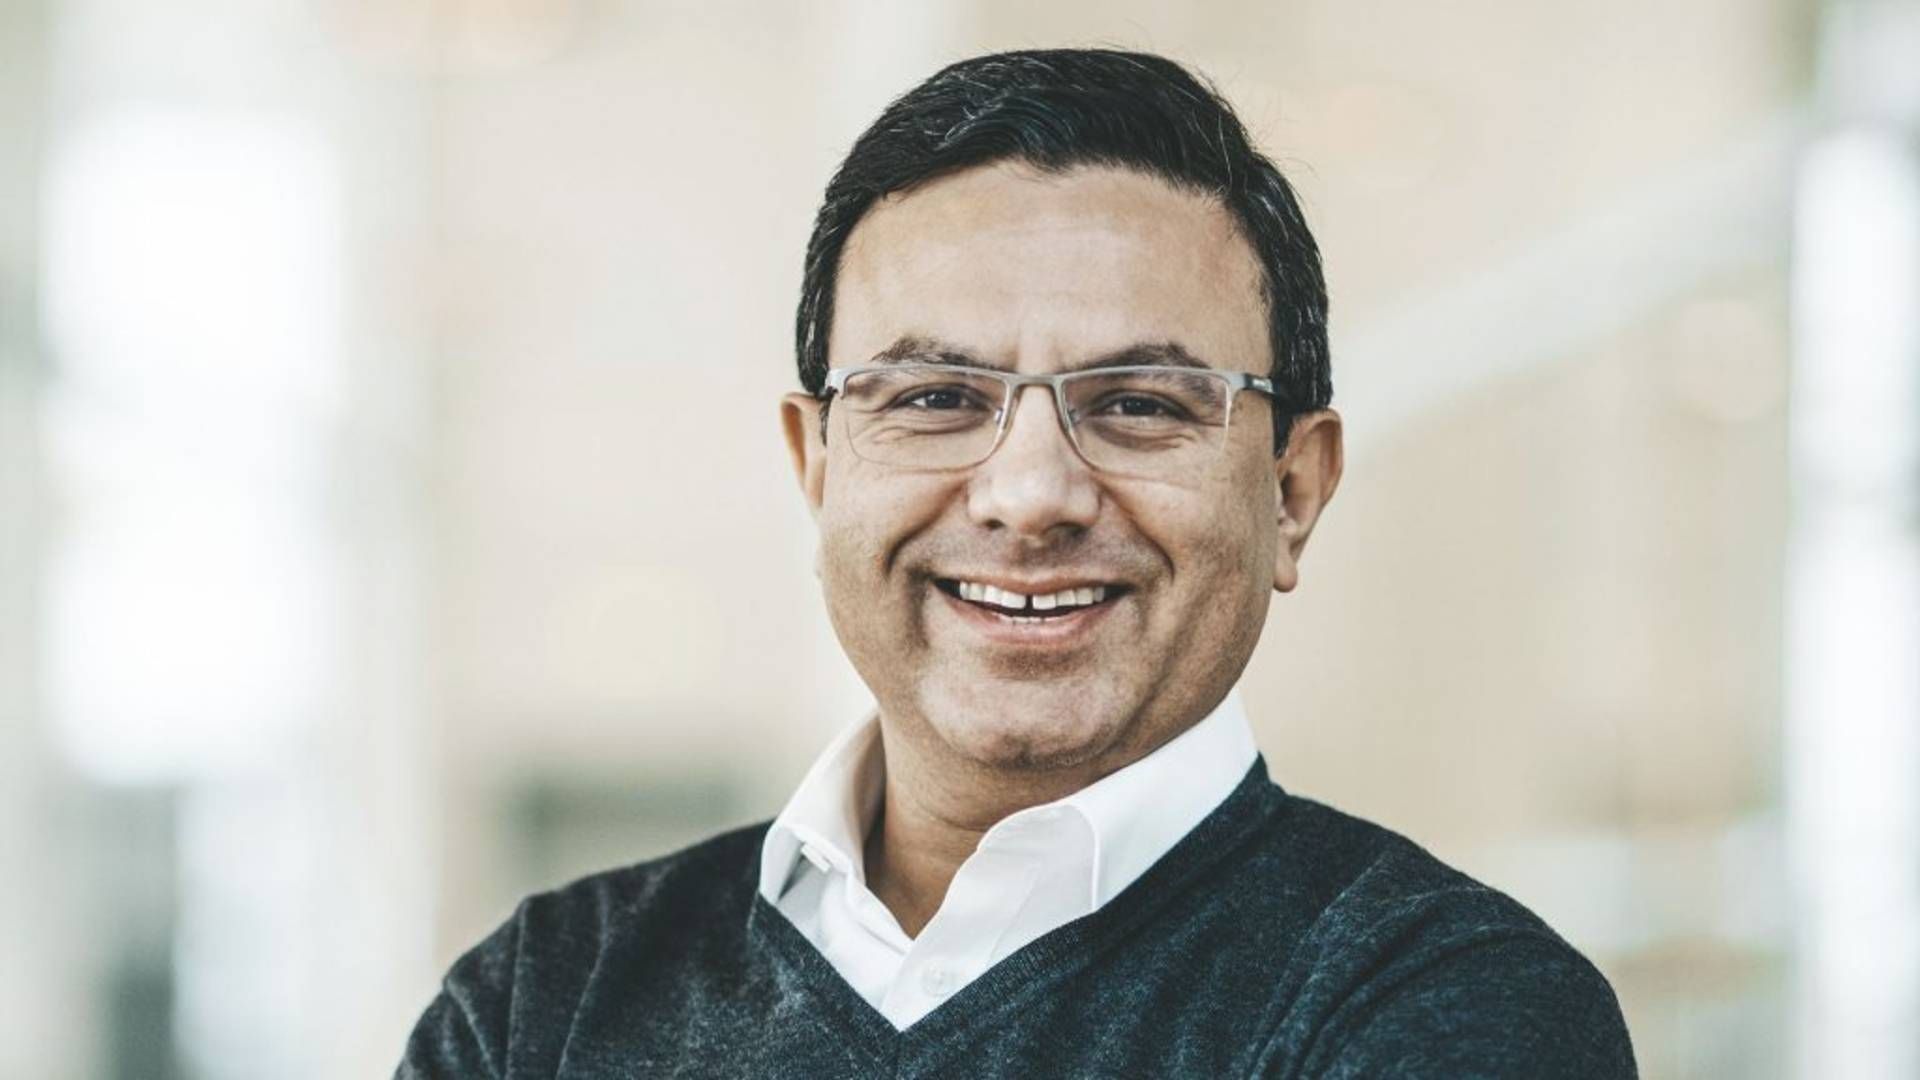 Naveed Siddiqi, board director of Amolyt and senior partner at Novo Holdings, says Amolyt "is a great example of a high quality, late stage private European company." | Photo: Novo Ventures / PR